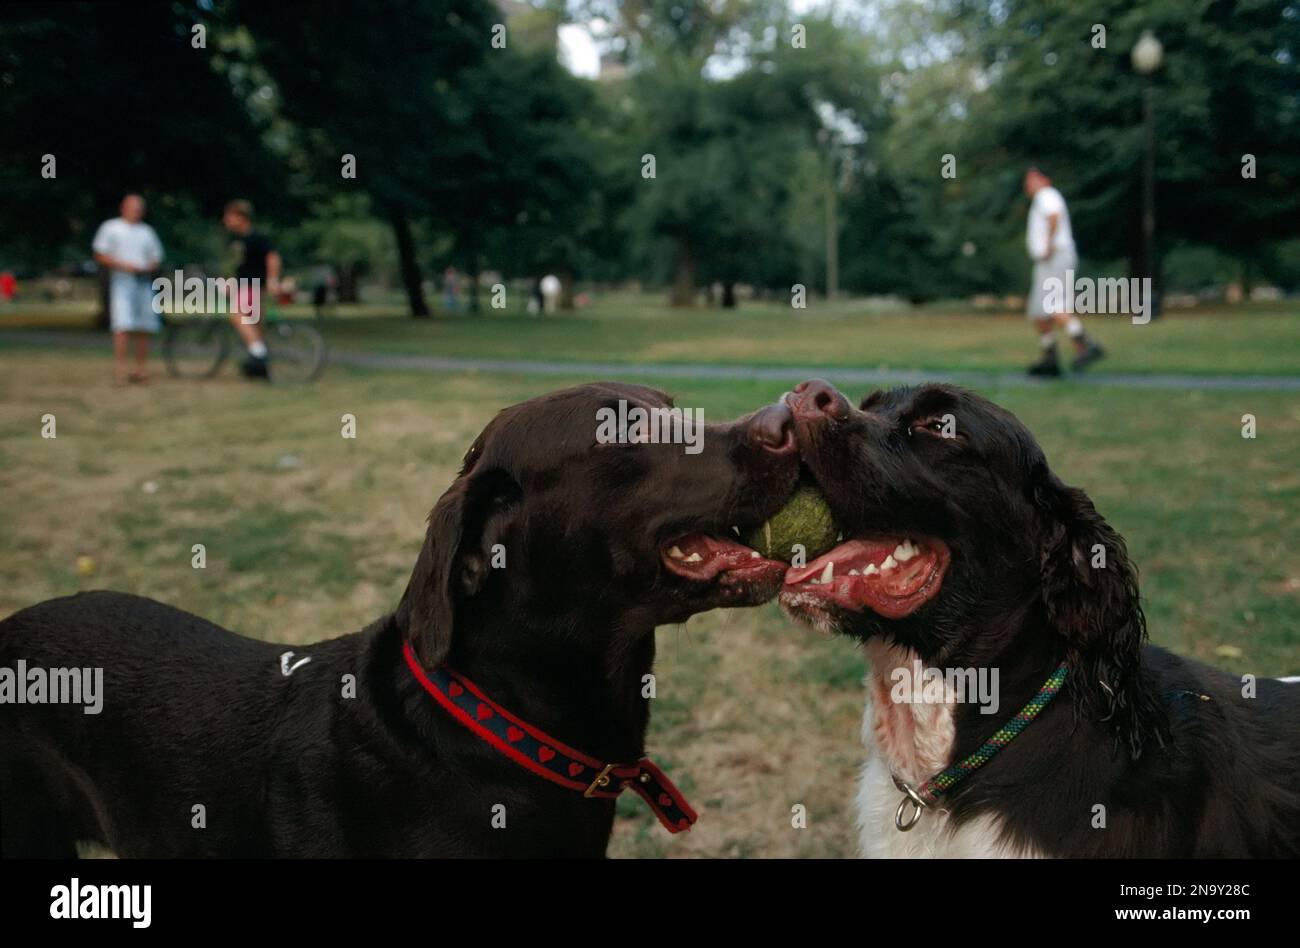 Two dogs play together sharing a tennis ball, Boston Common; Boston, Massachusetts, United States of America Stock Photo